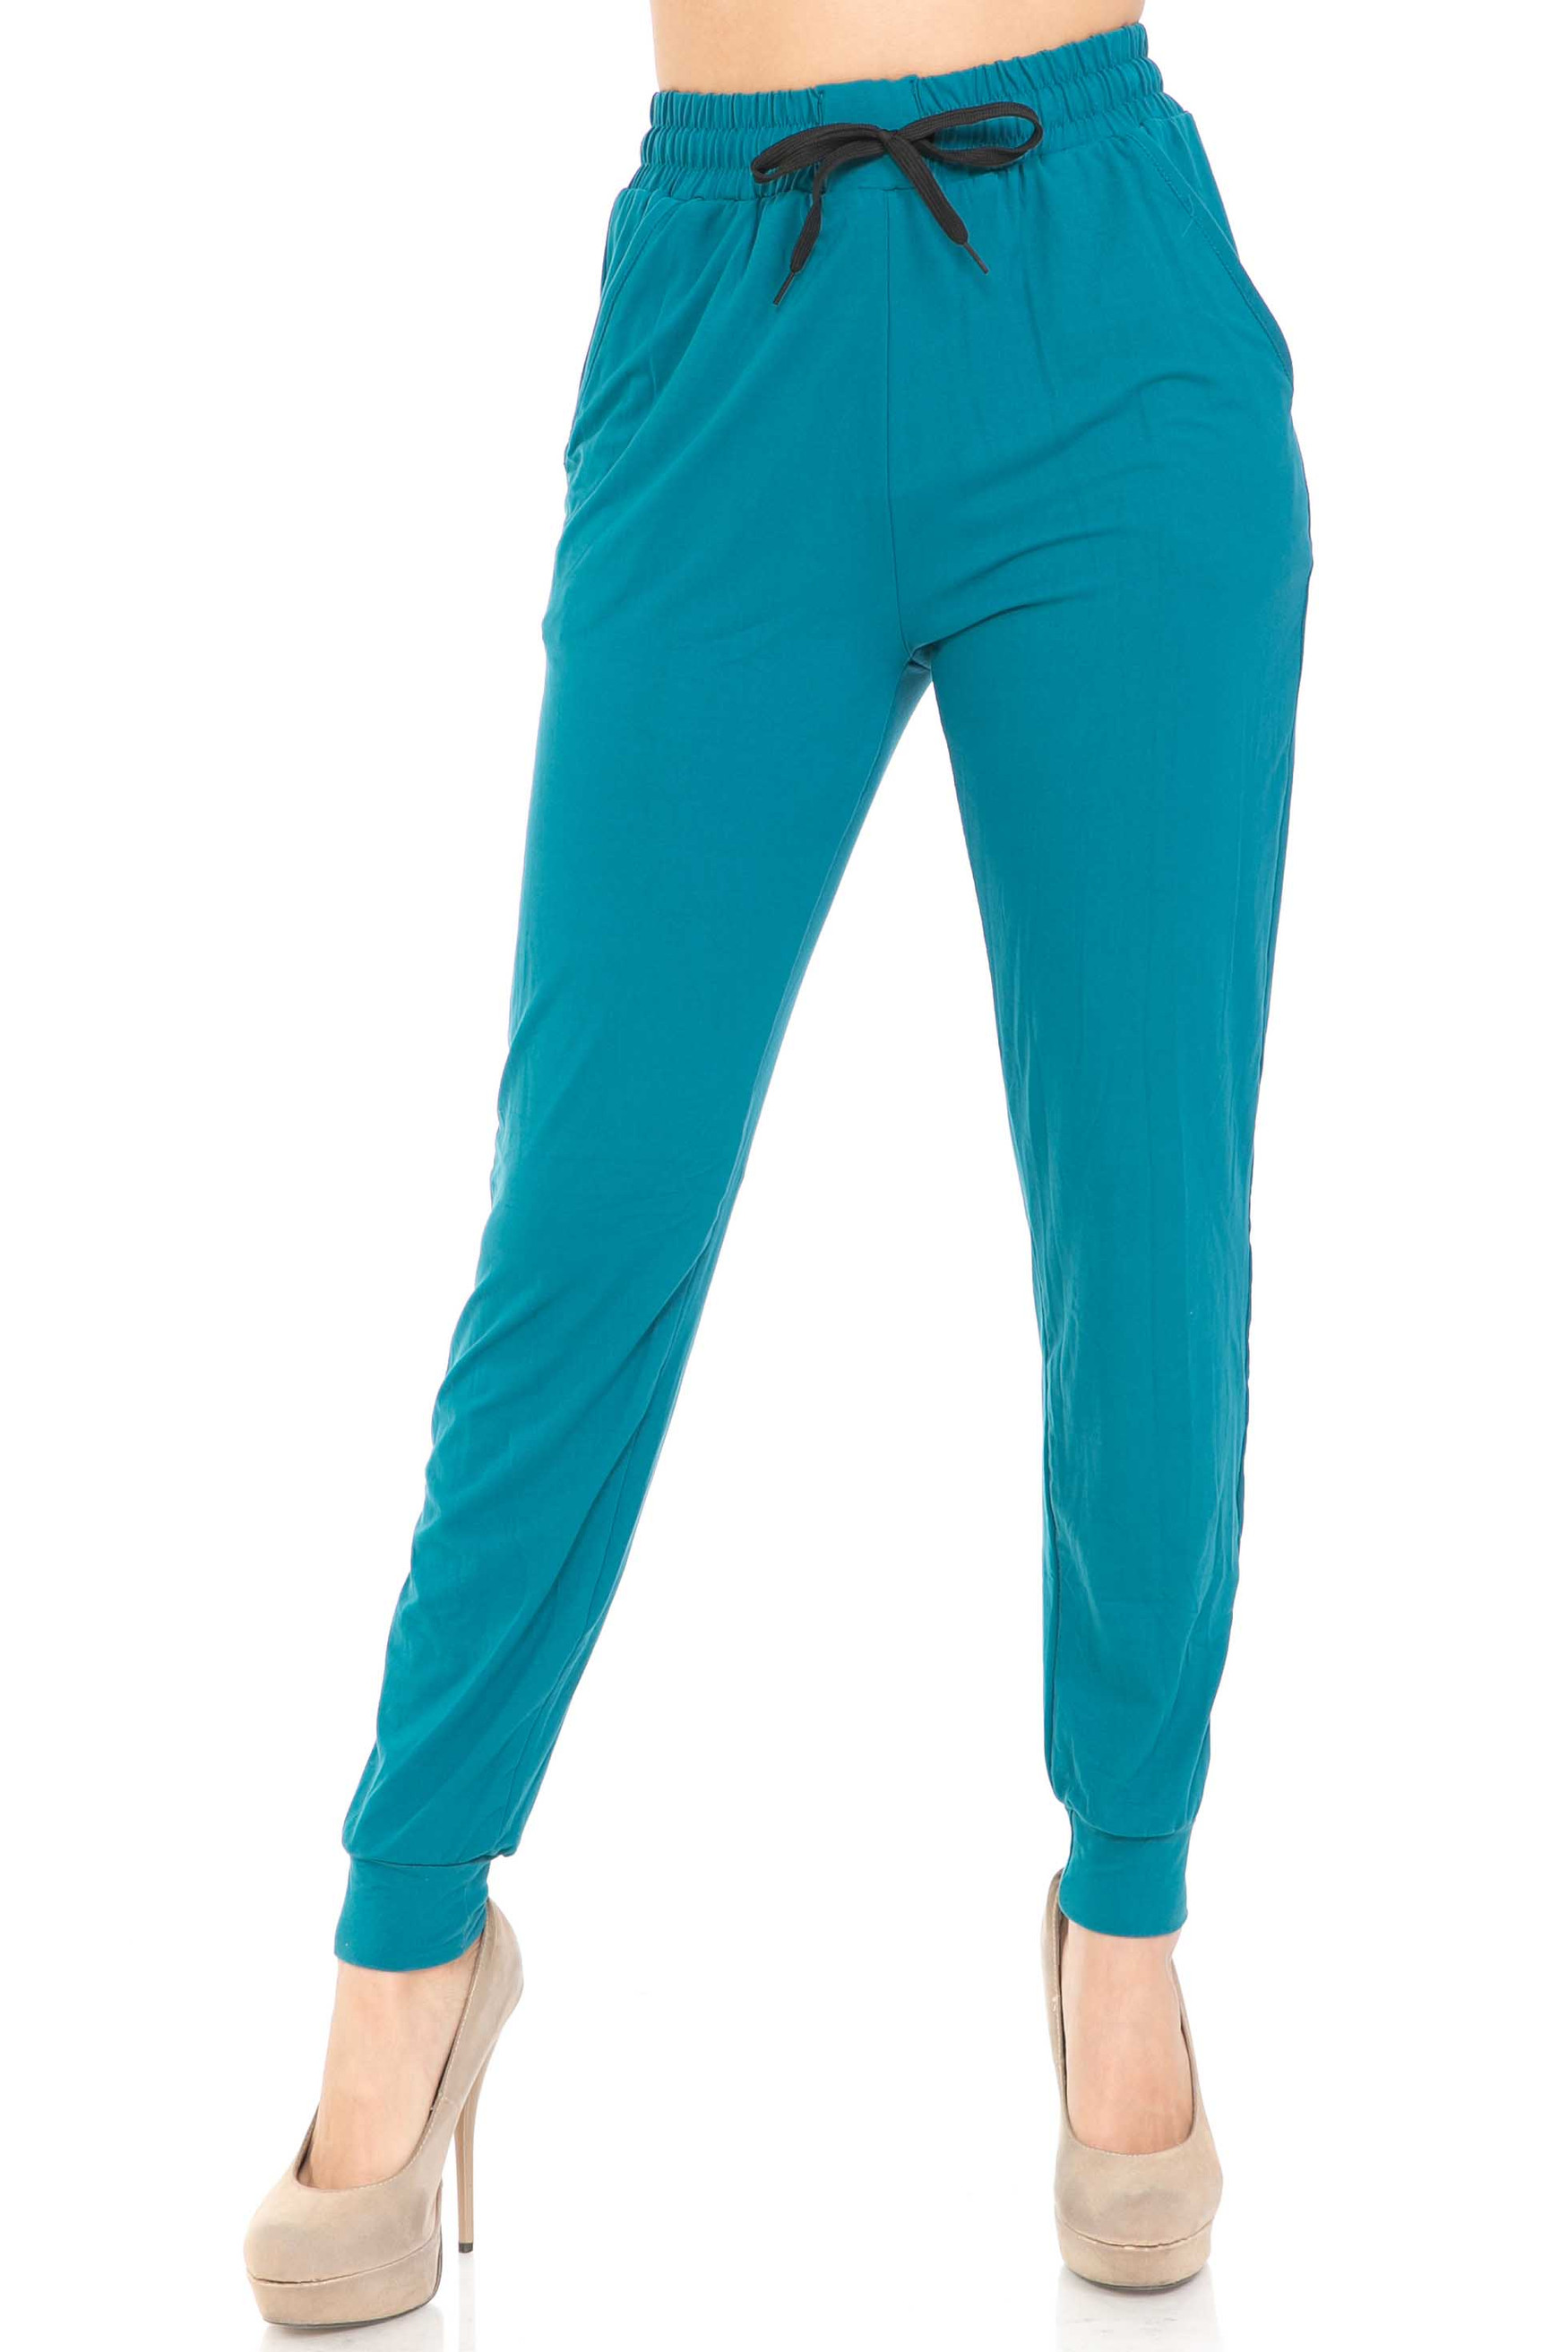 Buttery Soft Solid Basic Teal Joggers - EEVEE